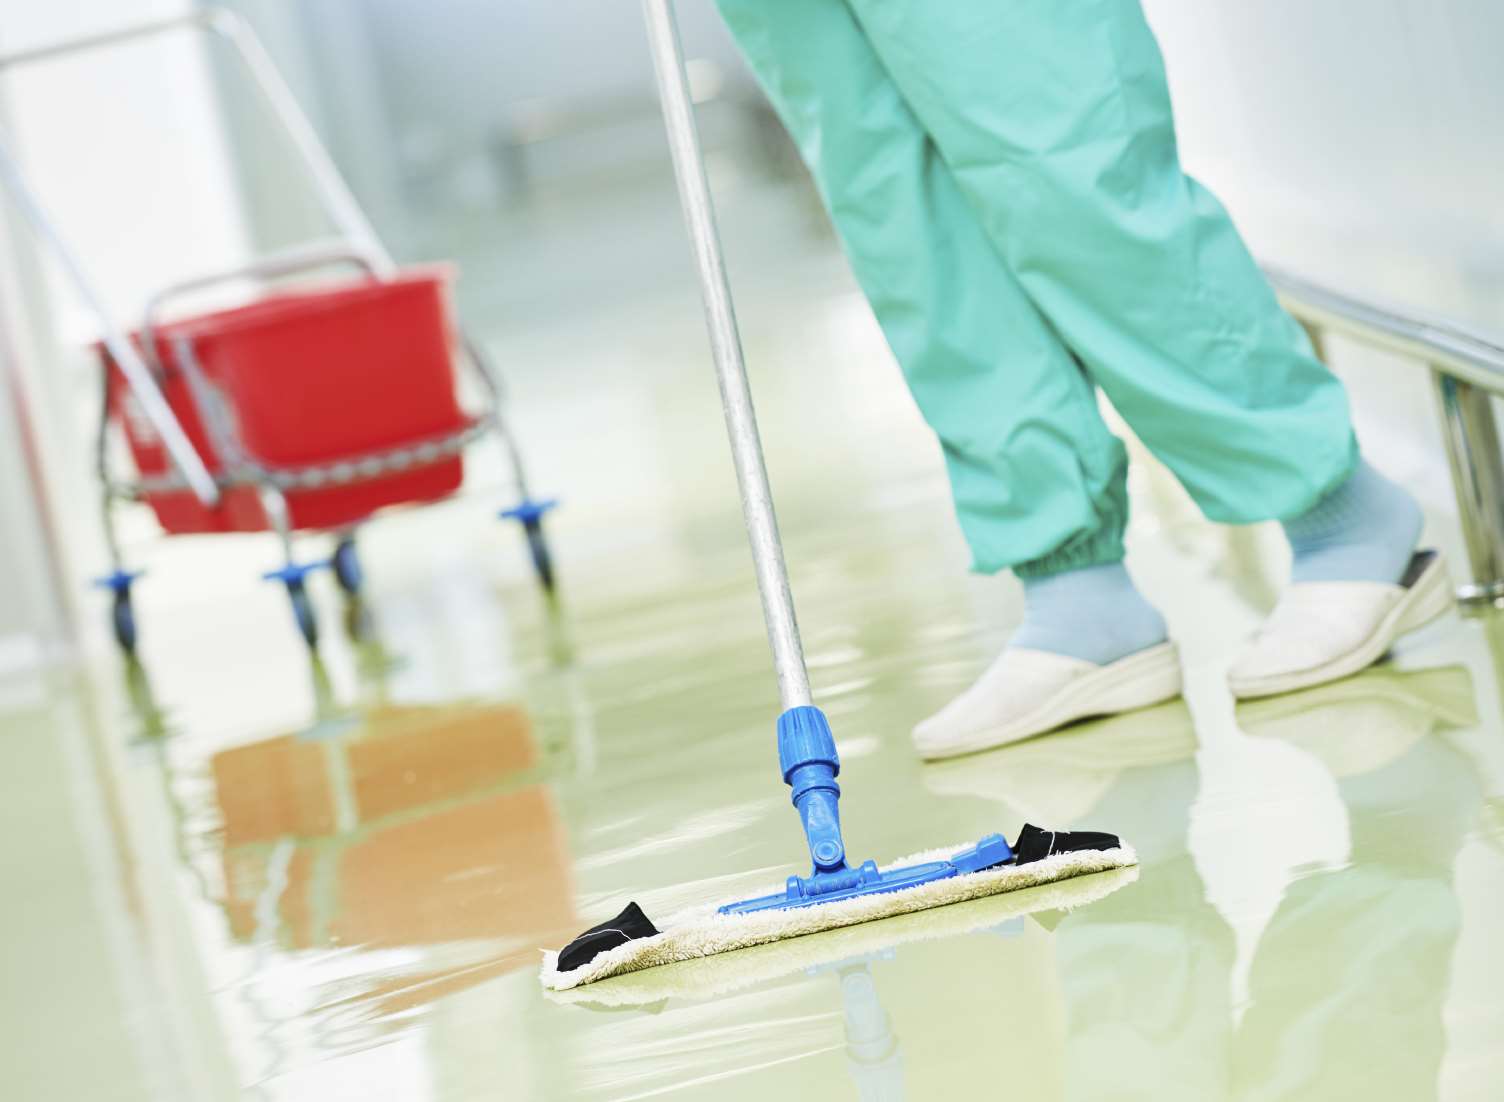 Cleanliness needs to improve after MRSA outbreaks at Dartford hospital. iStock image.